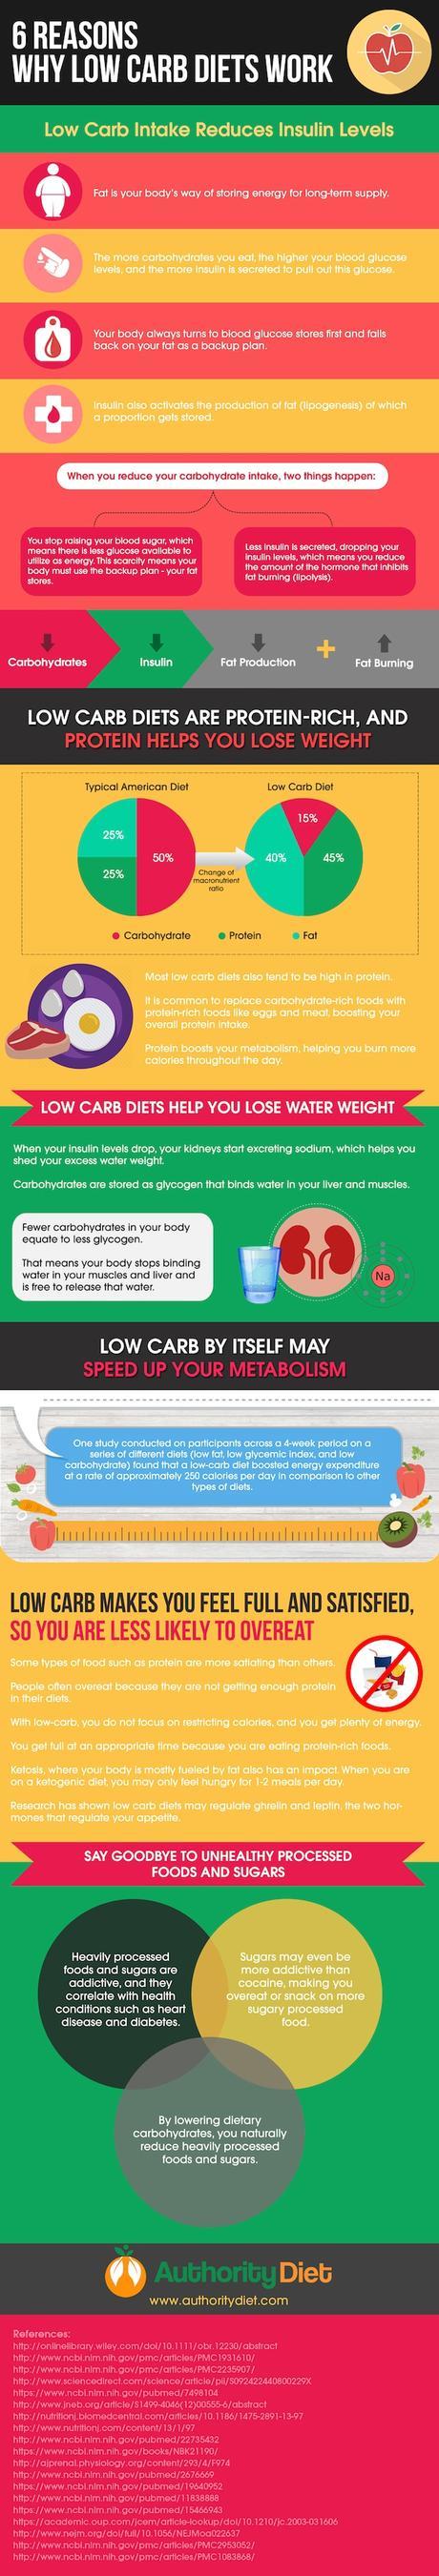 why low carb diets work infographic